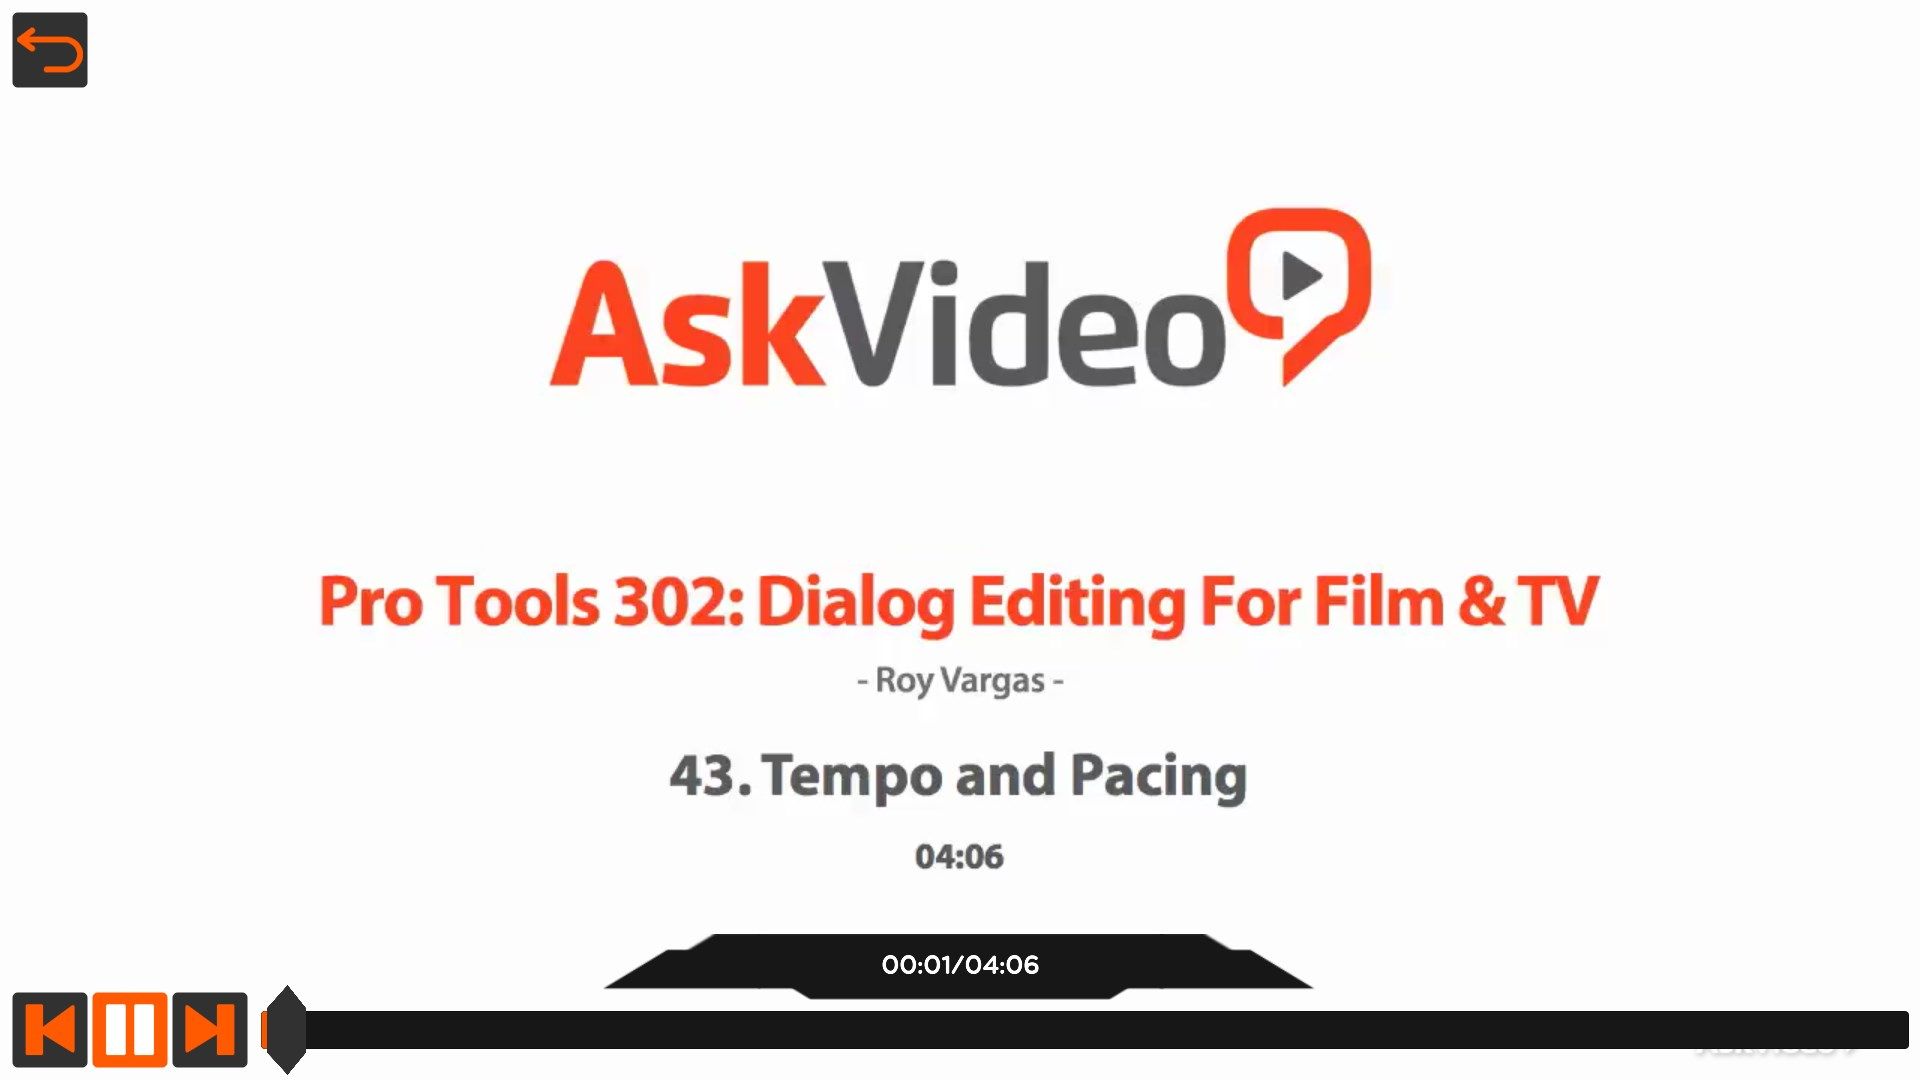 Dialog Editing For Film & TV Course For Pro Tools